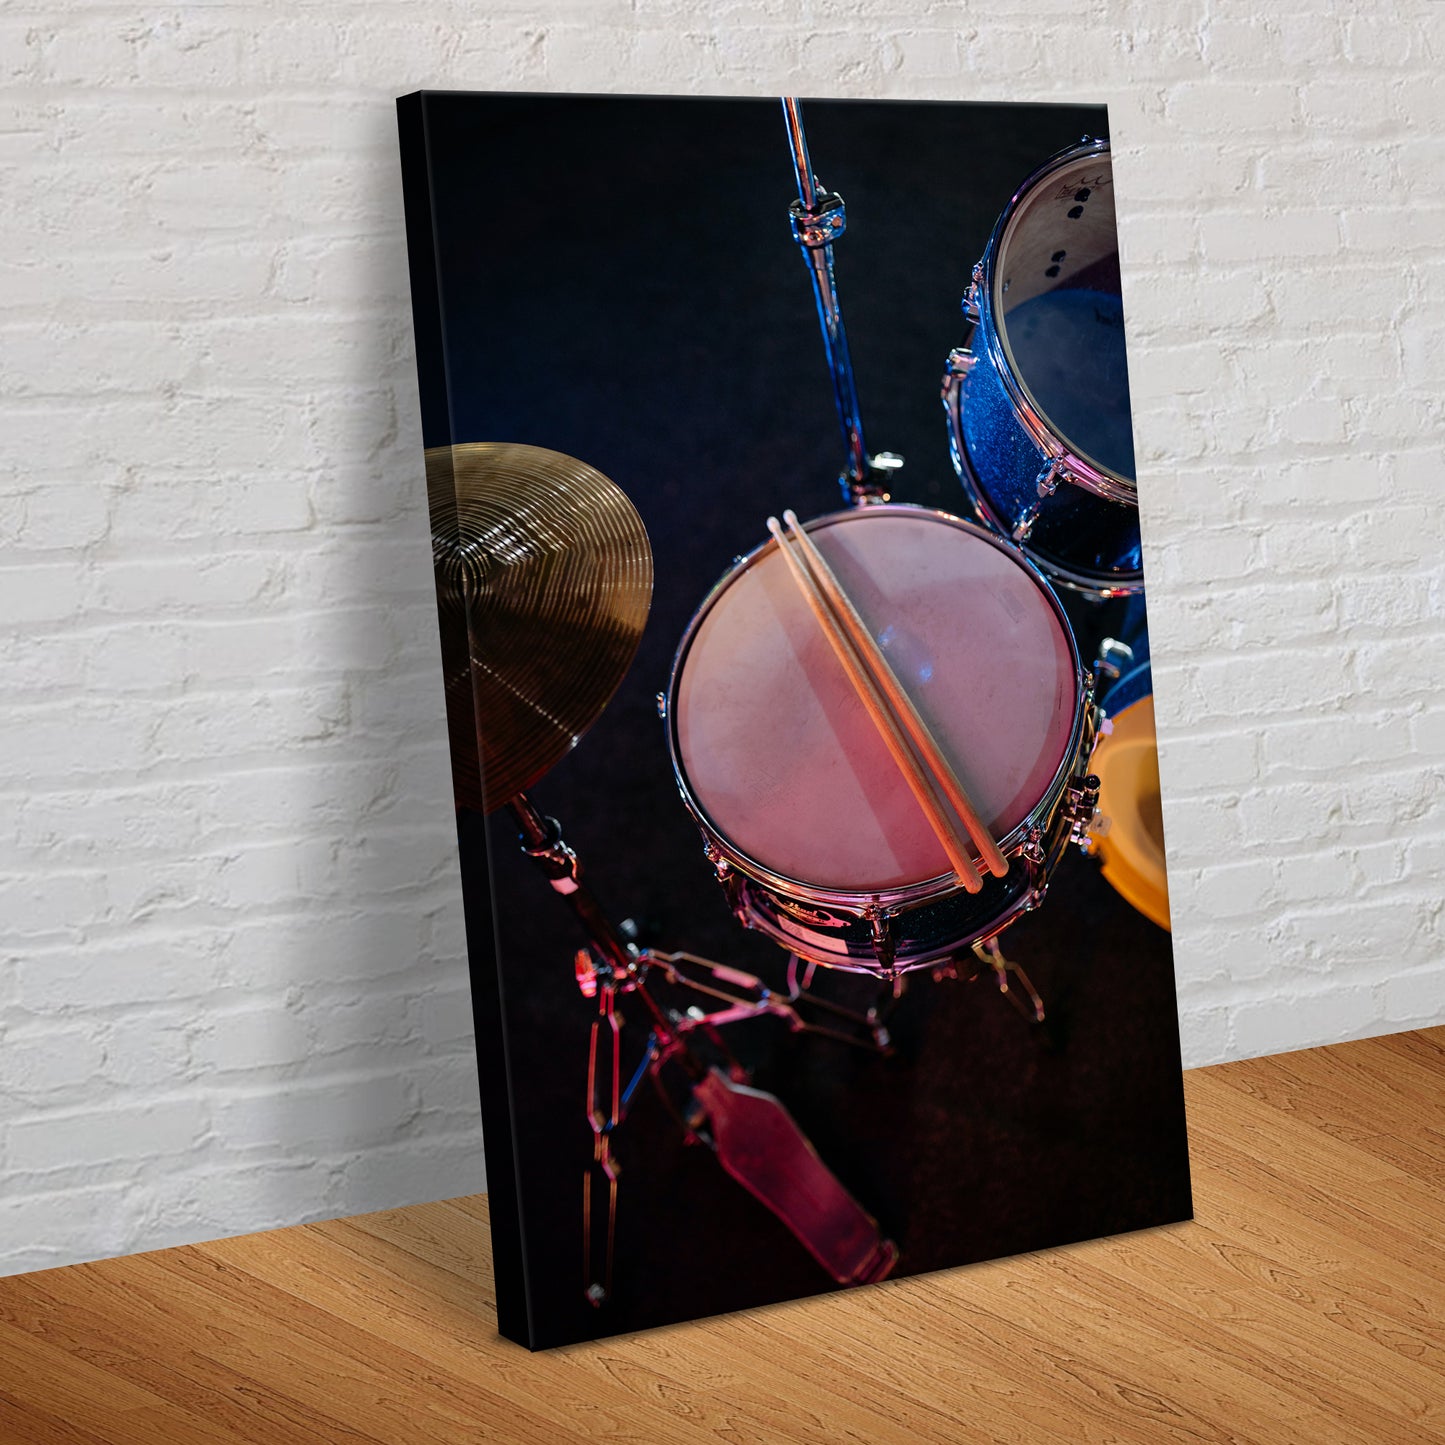 Drums Modern Canvas Wall Art - Image by Tailored Canvases